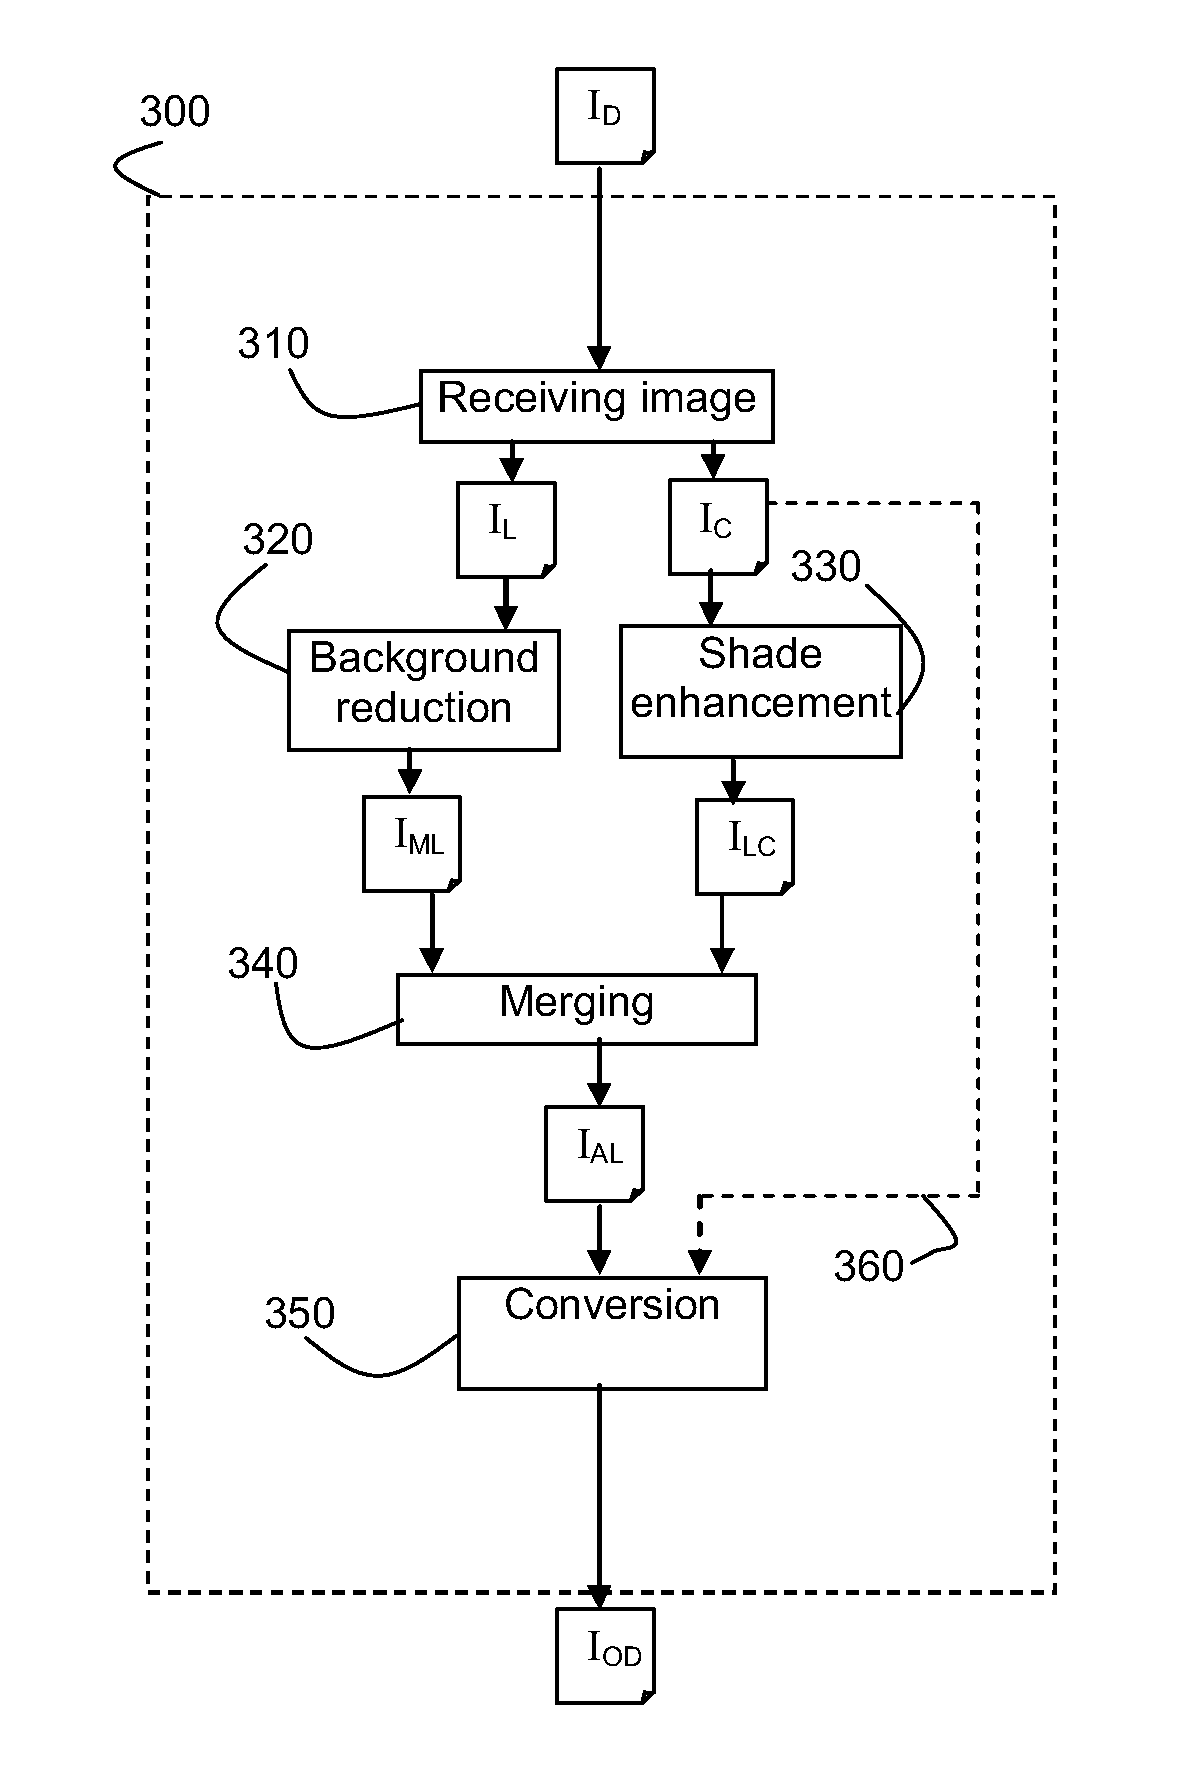 Image processing system for processing a digital image and image processing method of processing a digital image